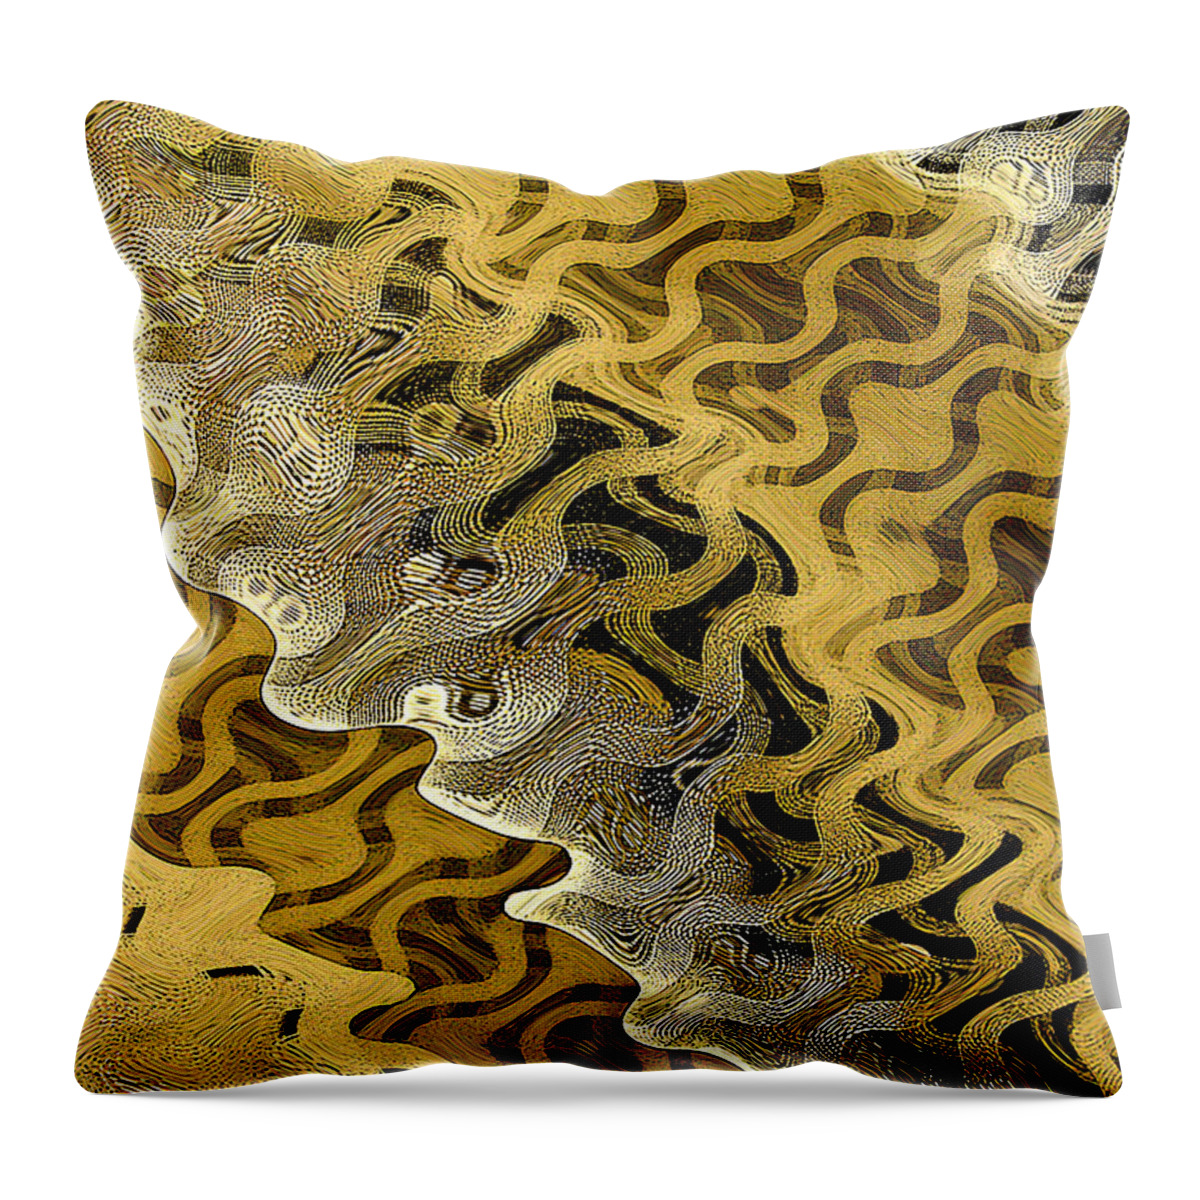 Abstract Throw Pillow featuring the digital art Curtain Distortion by Gary Olsen-Hasek